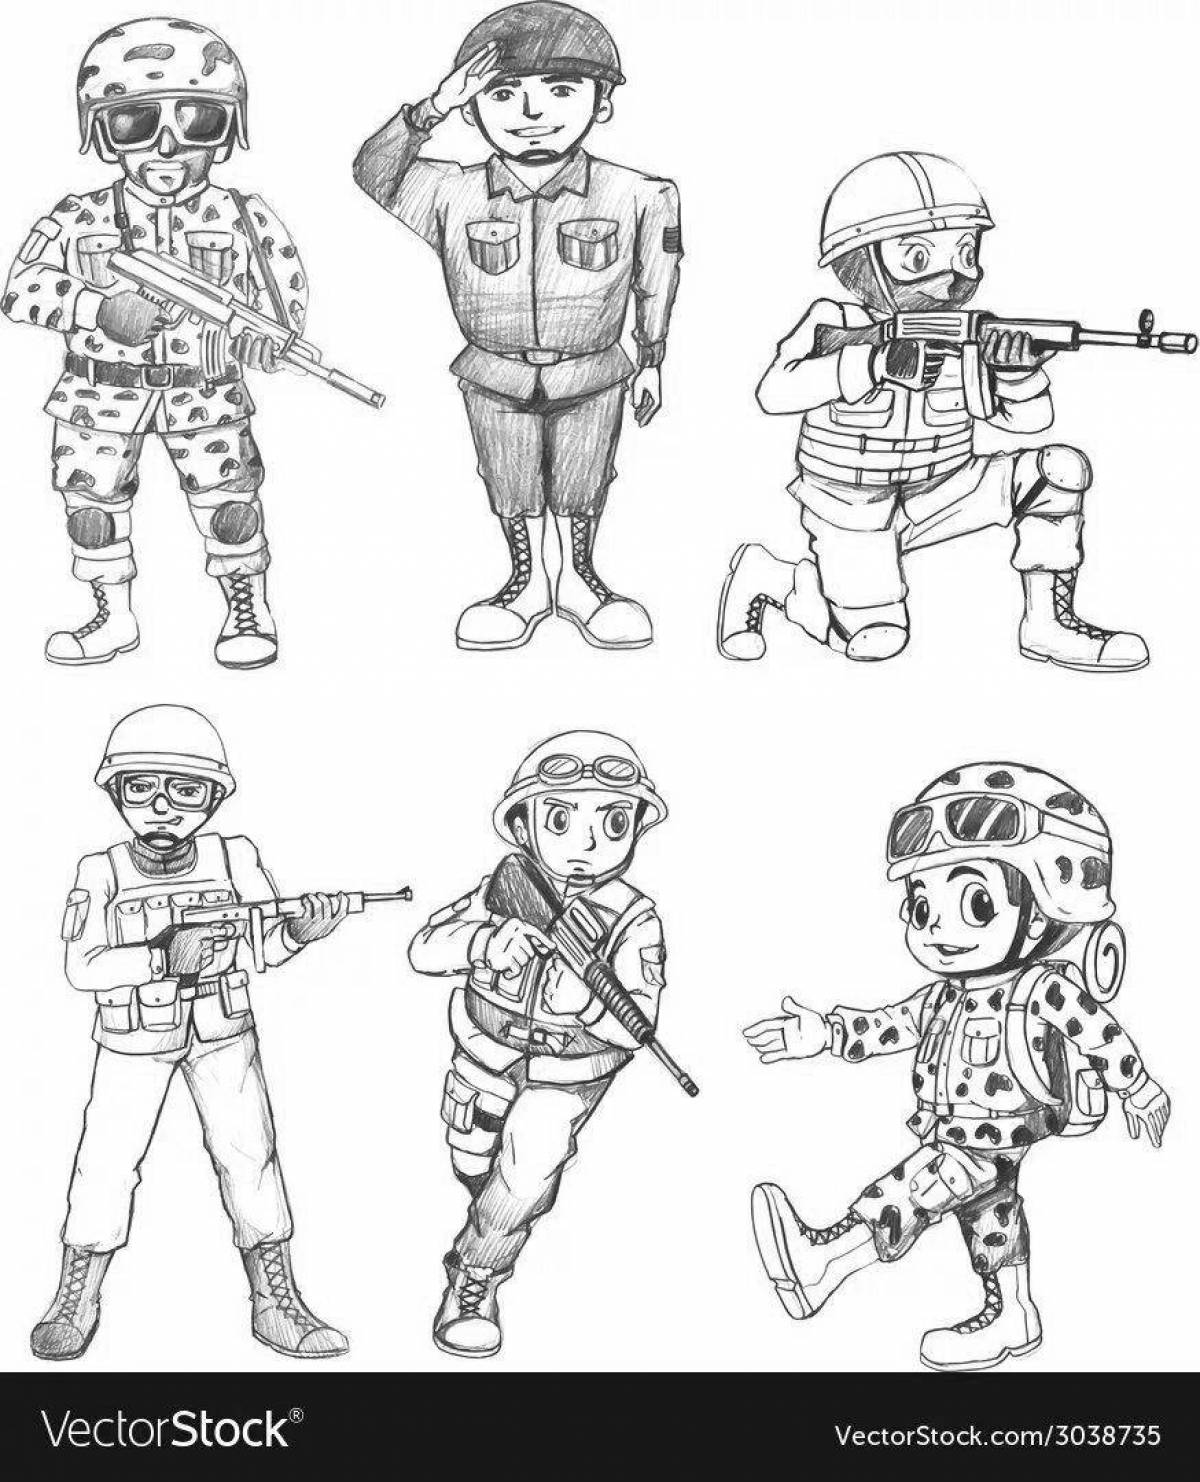 Charming soldier coloring page